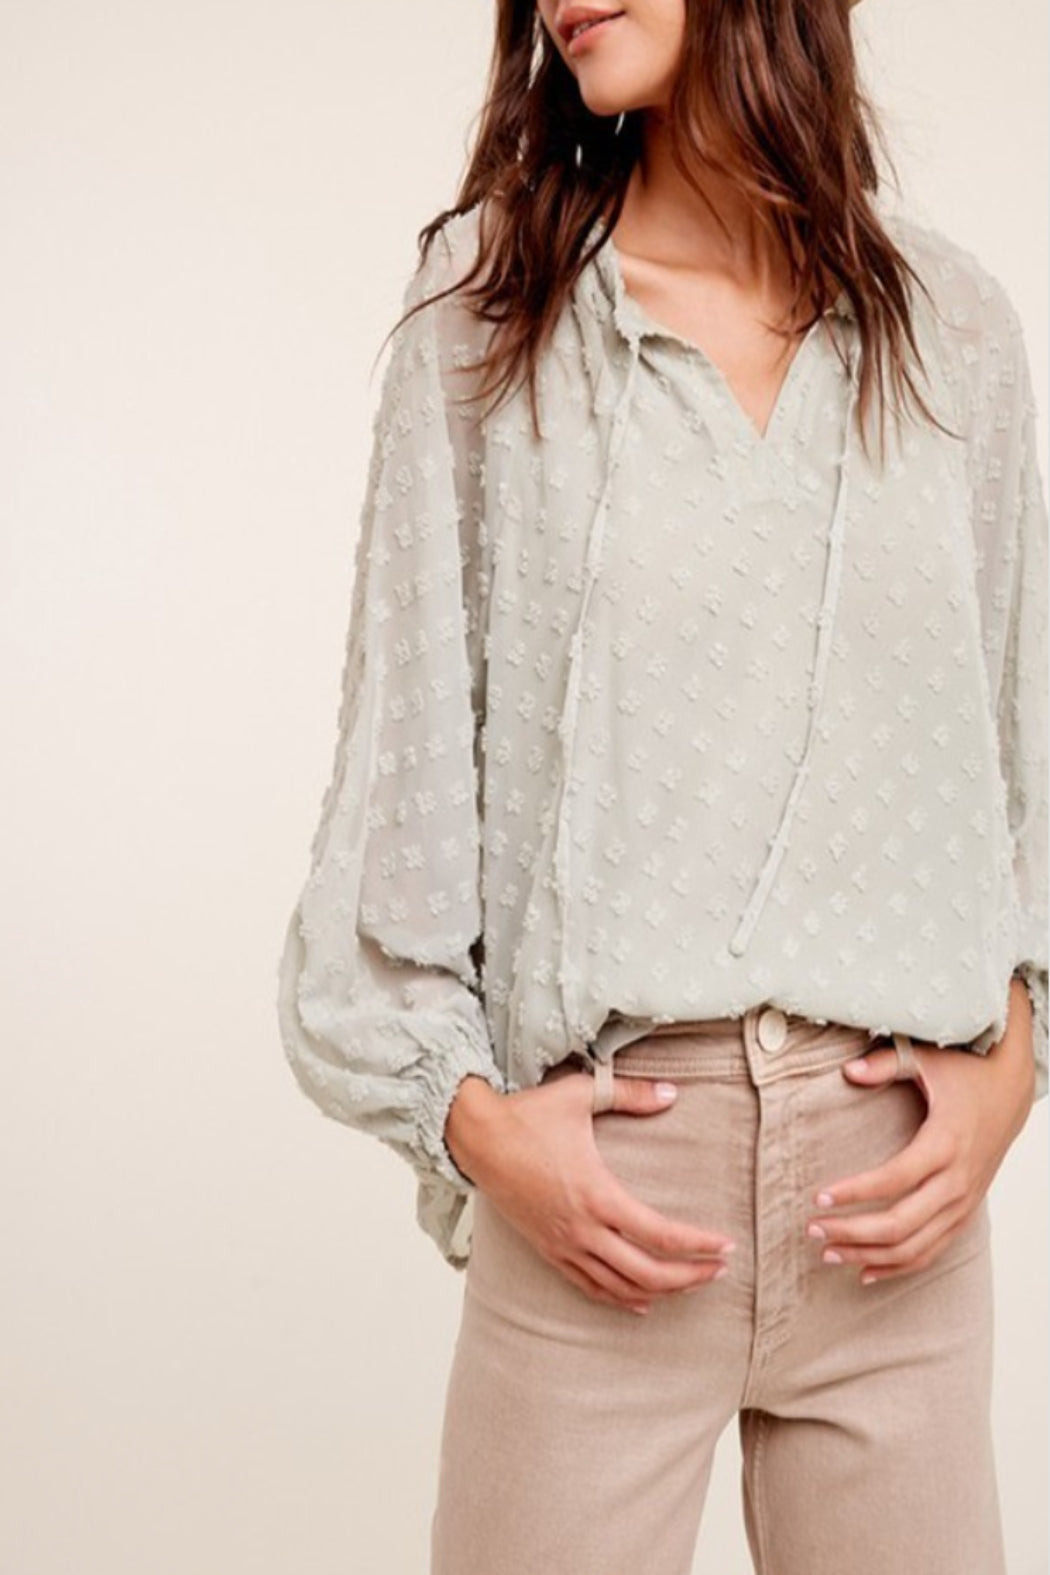 Sweet Illusion Tufted Dot Woven Top